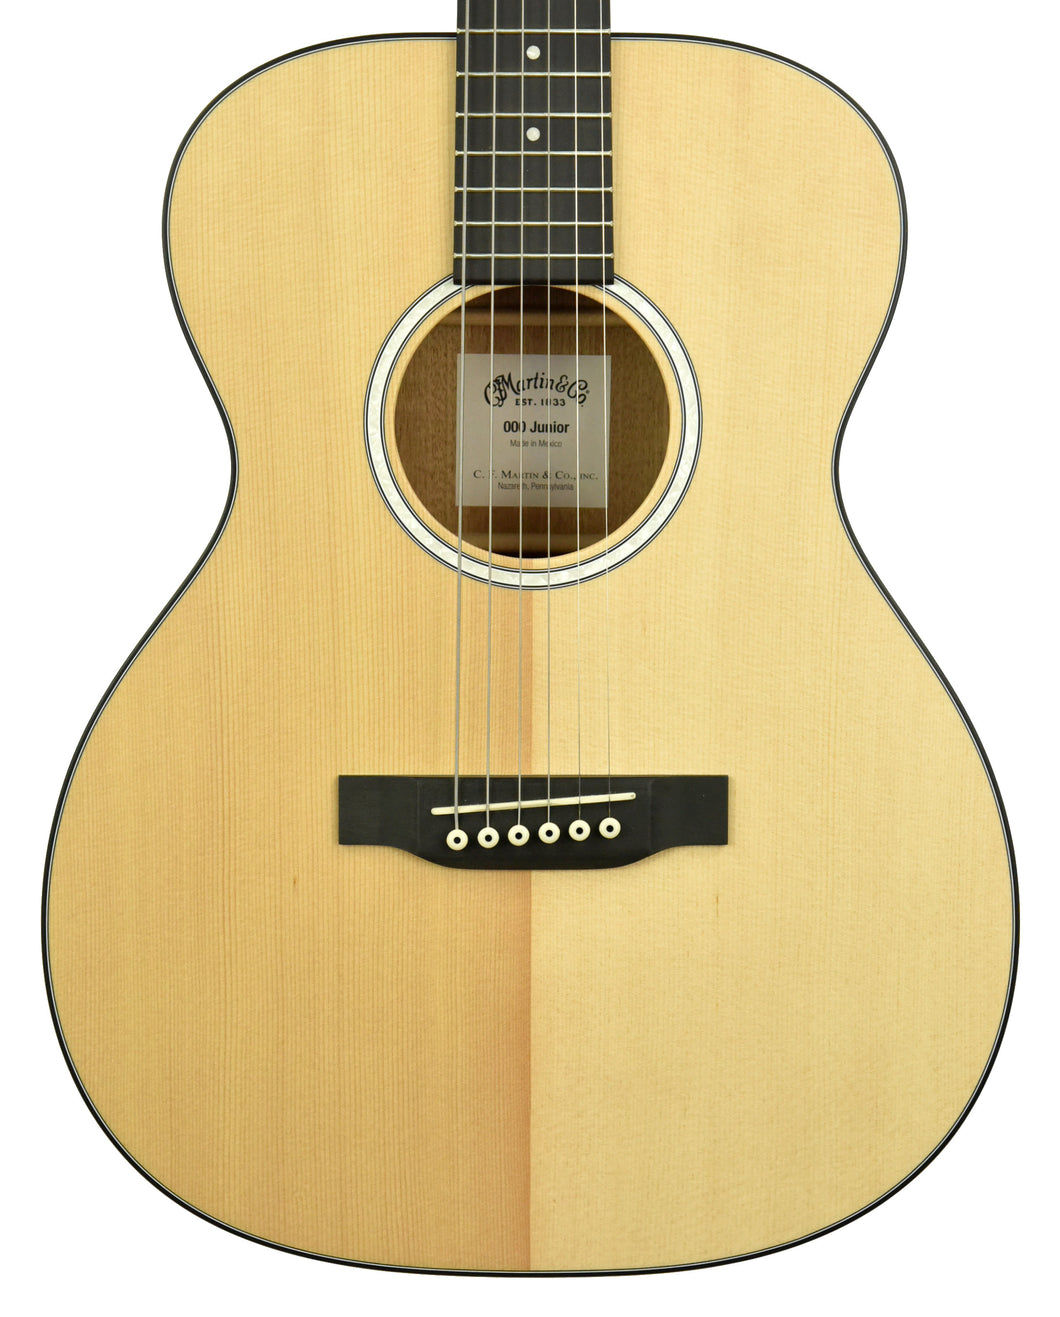 Martin 000 Jr-10 Acoustic Guitar in Natural 2429211 - The Music Gallery